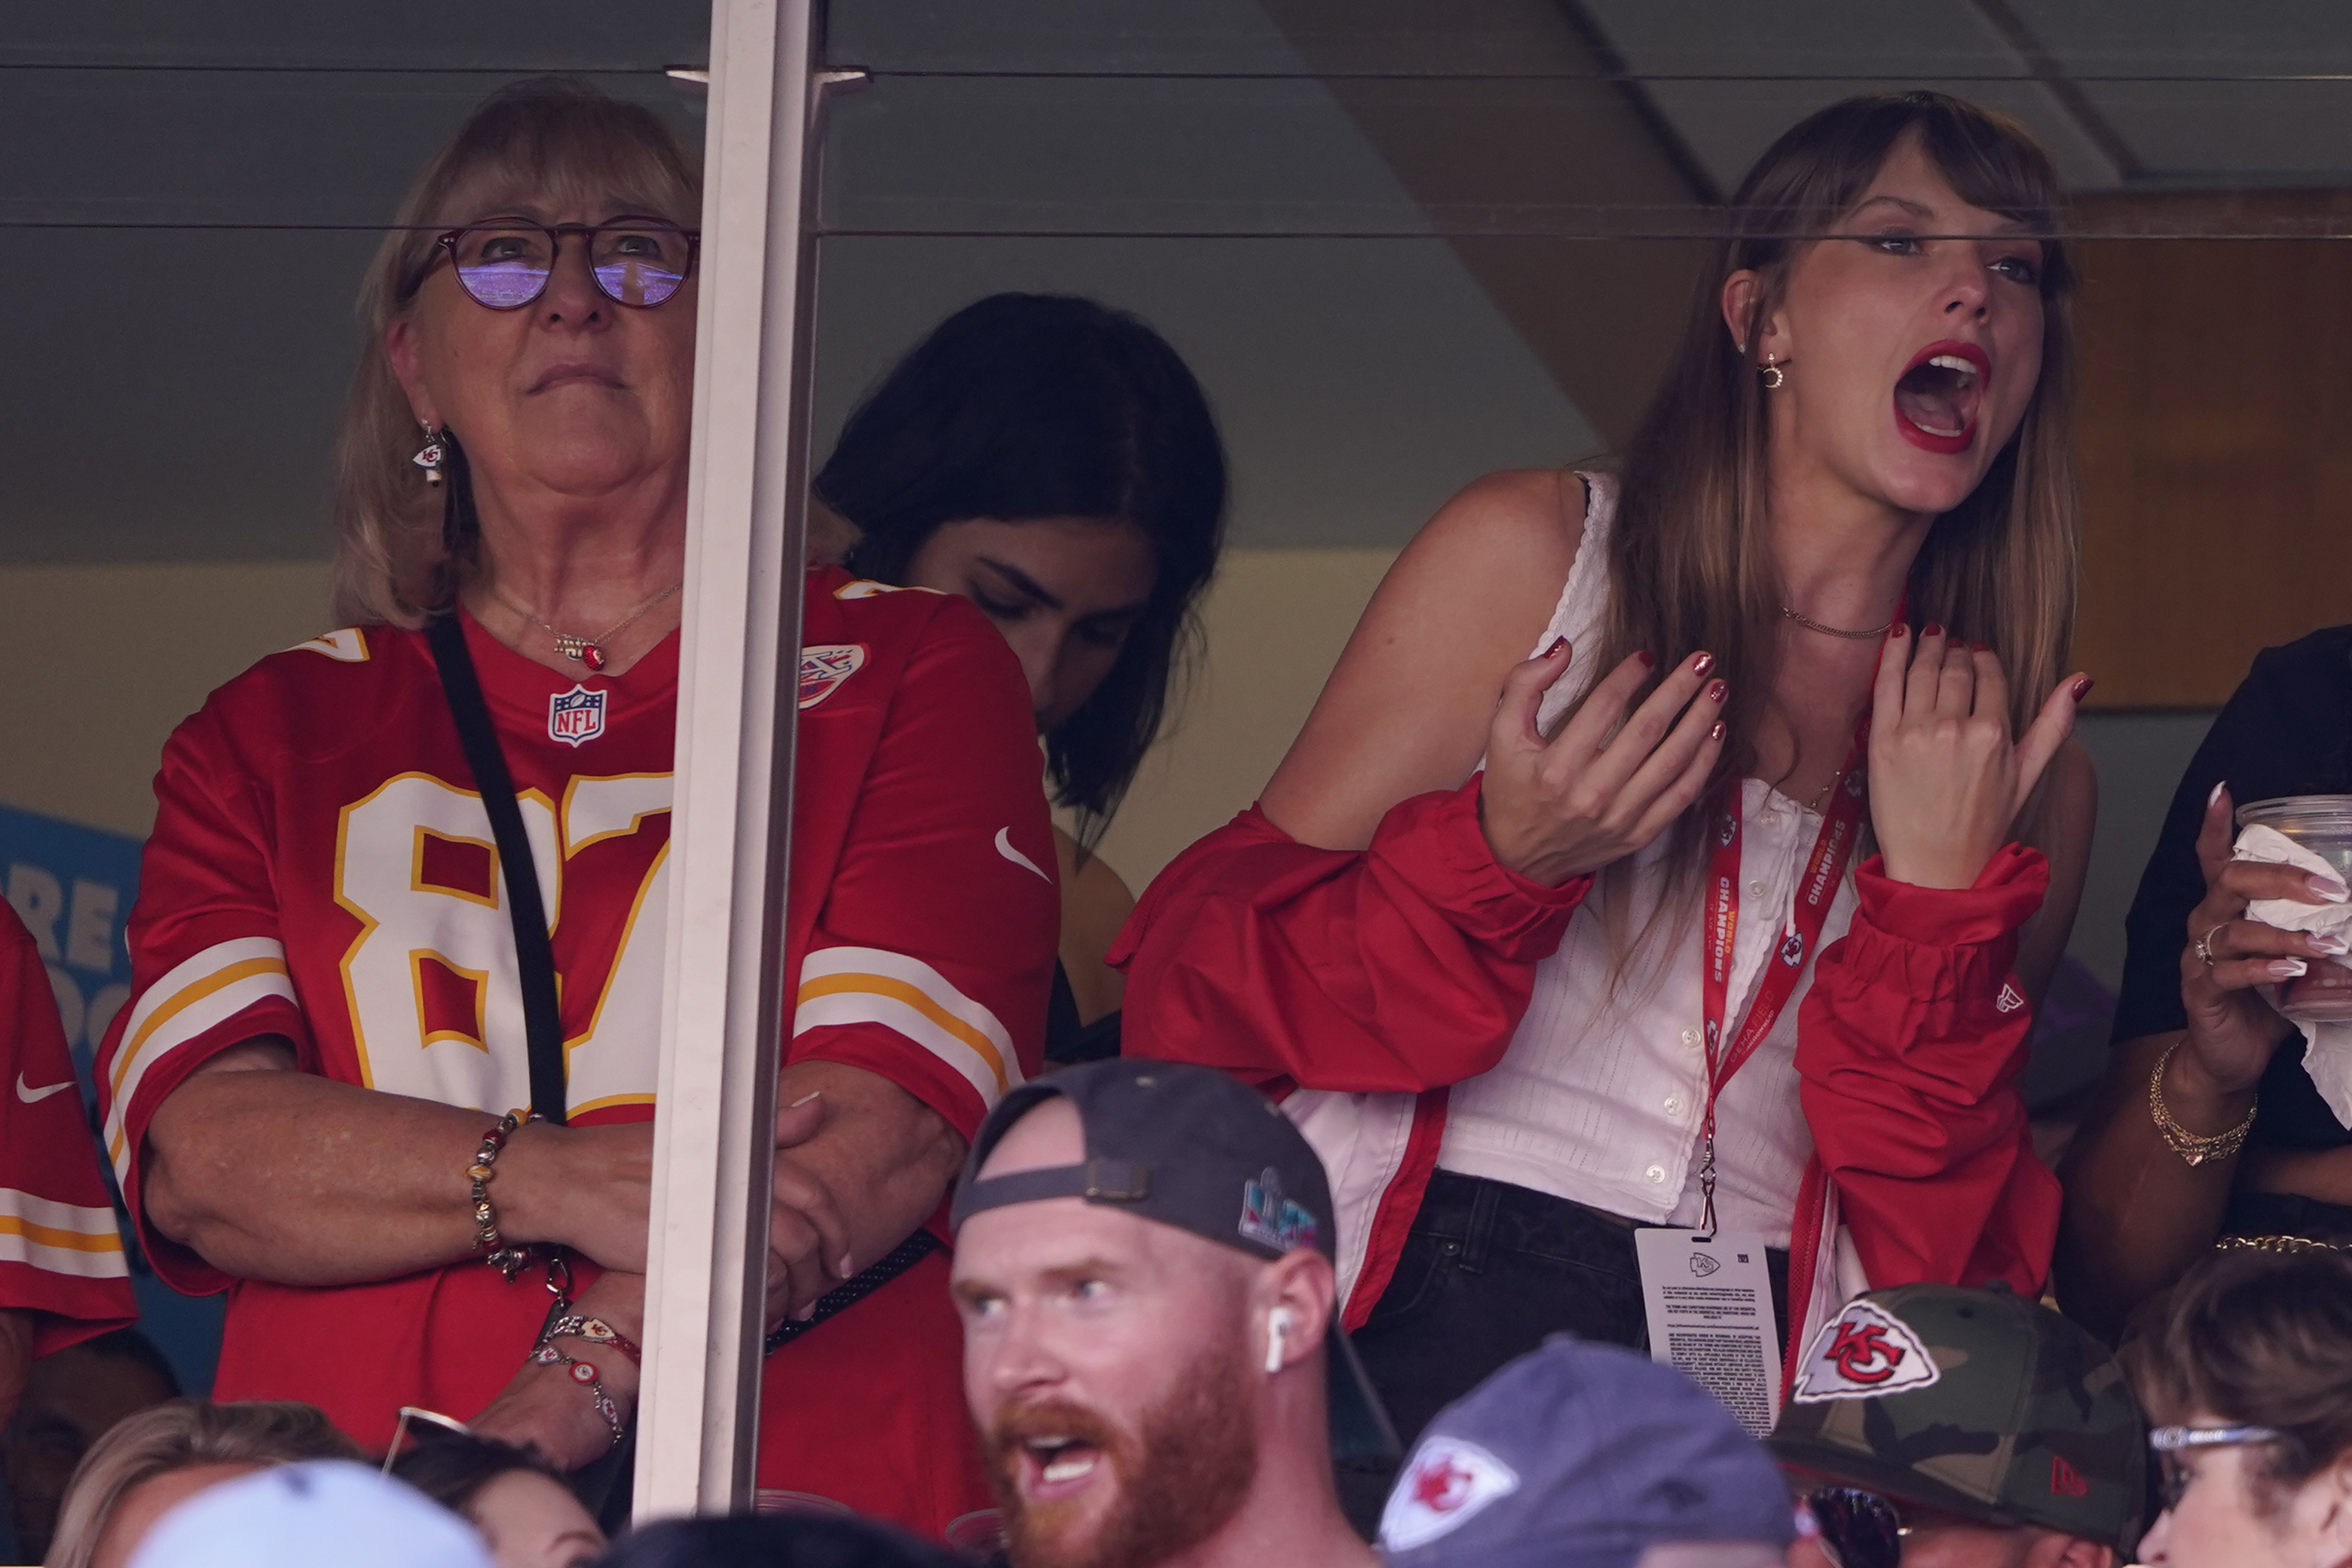 Photo Of Travis Kelce Driving Away With Taylor Swift Is Going Viral - The  Spun: What's Trending In The Sports World Today